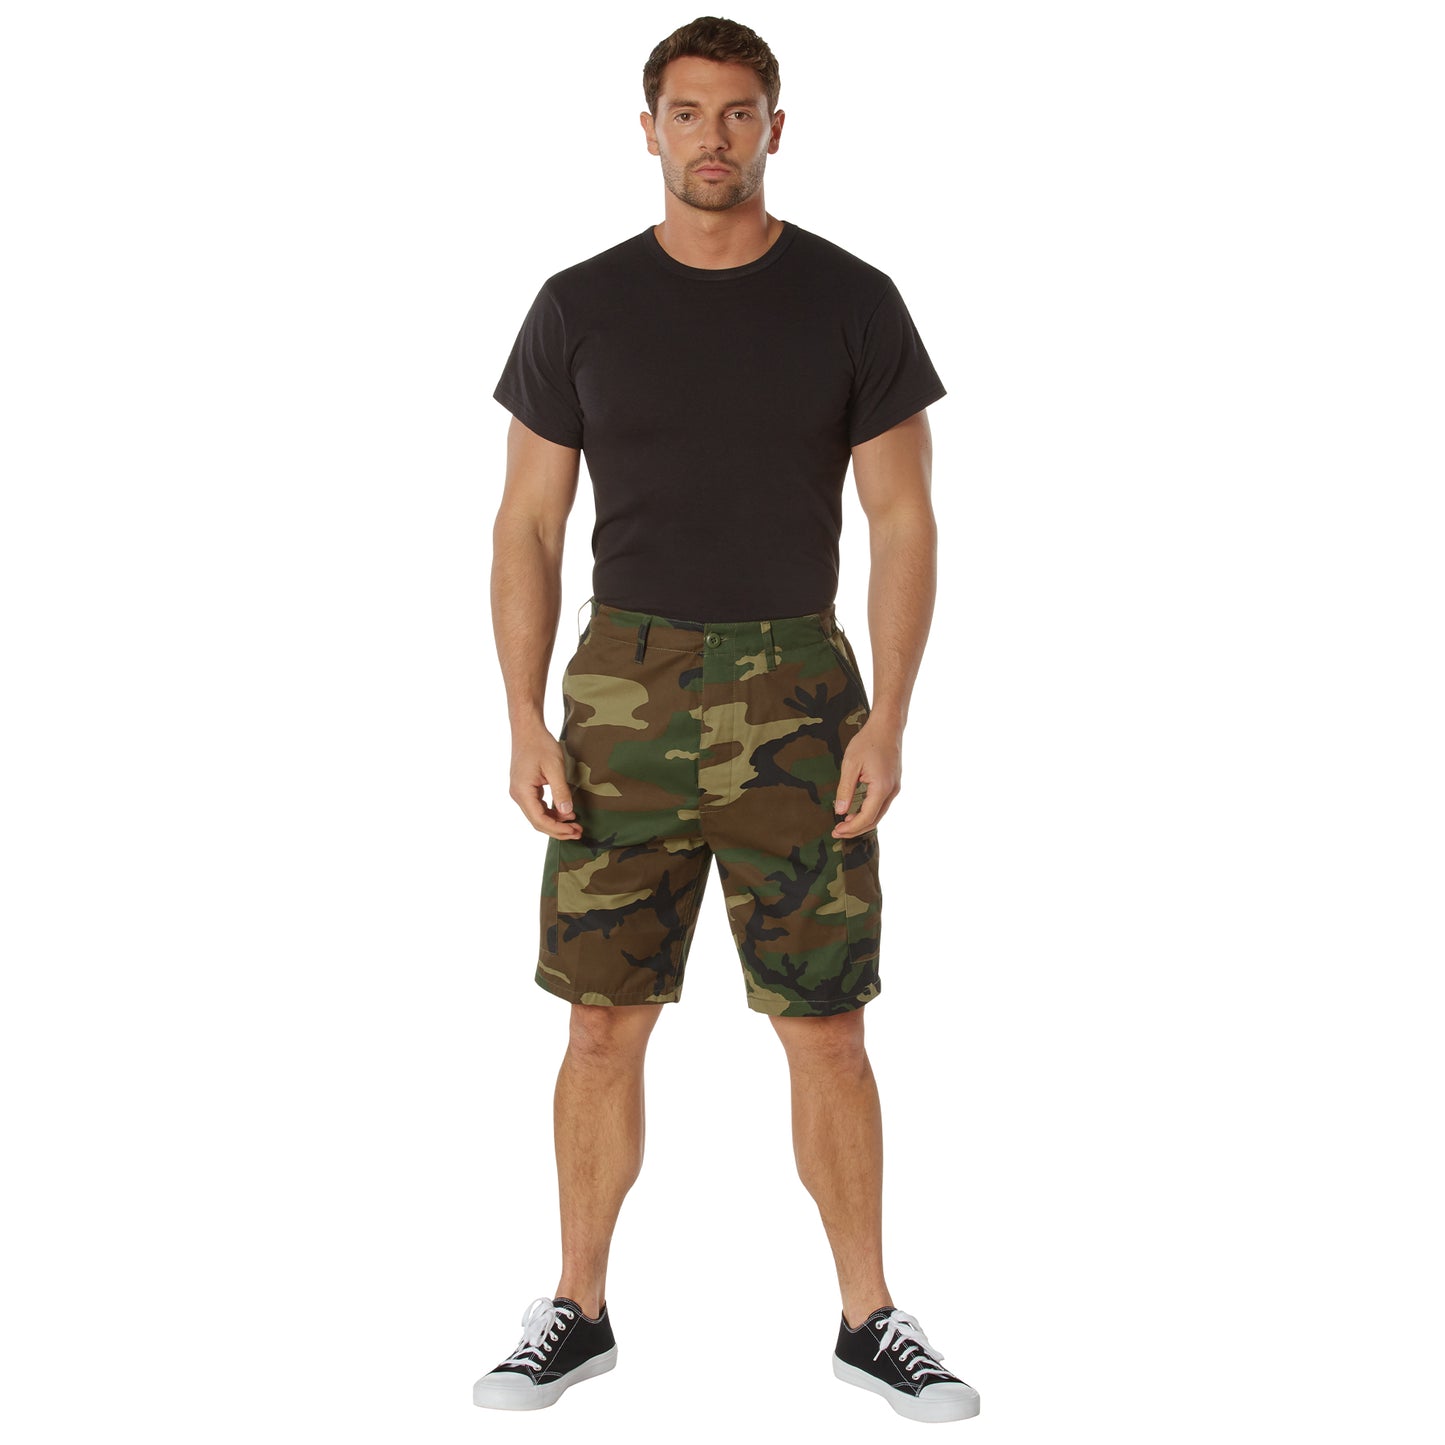 Rothco’s Tactical BDU Shorts are just what you need for the trail, range, and casual style. The cargo shorts provide with 6 pockets for plenty of EDC (Everyday Carry) storage options; two front slash pockets and two rear button down pockets, plus two large side cargo pockets. www.defenceqstore.com.au